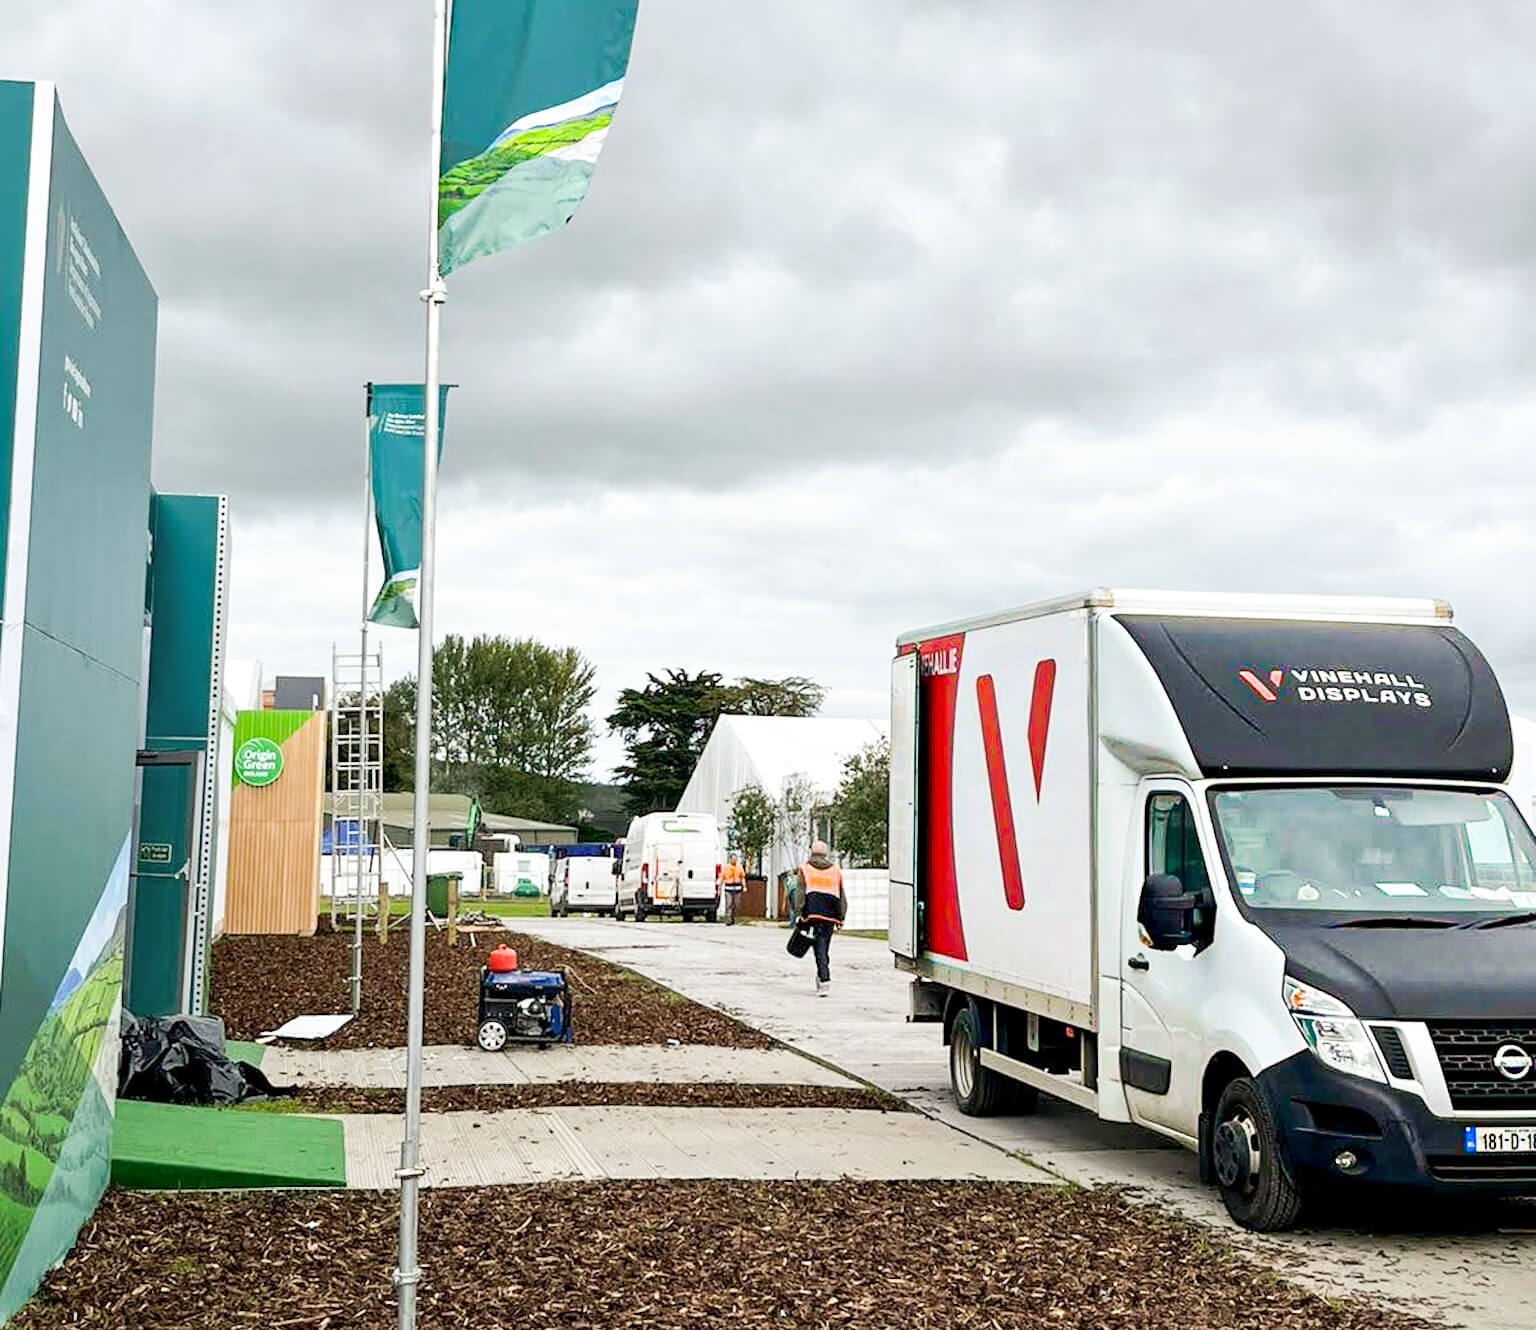 A van outside of an exhibition stand at the national ploughing championships in ireland.